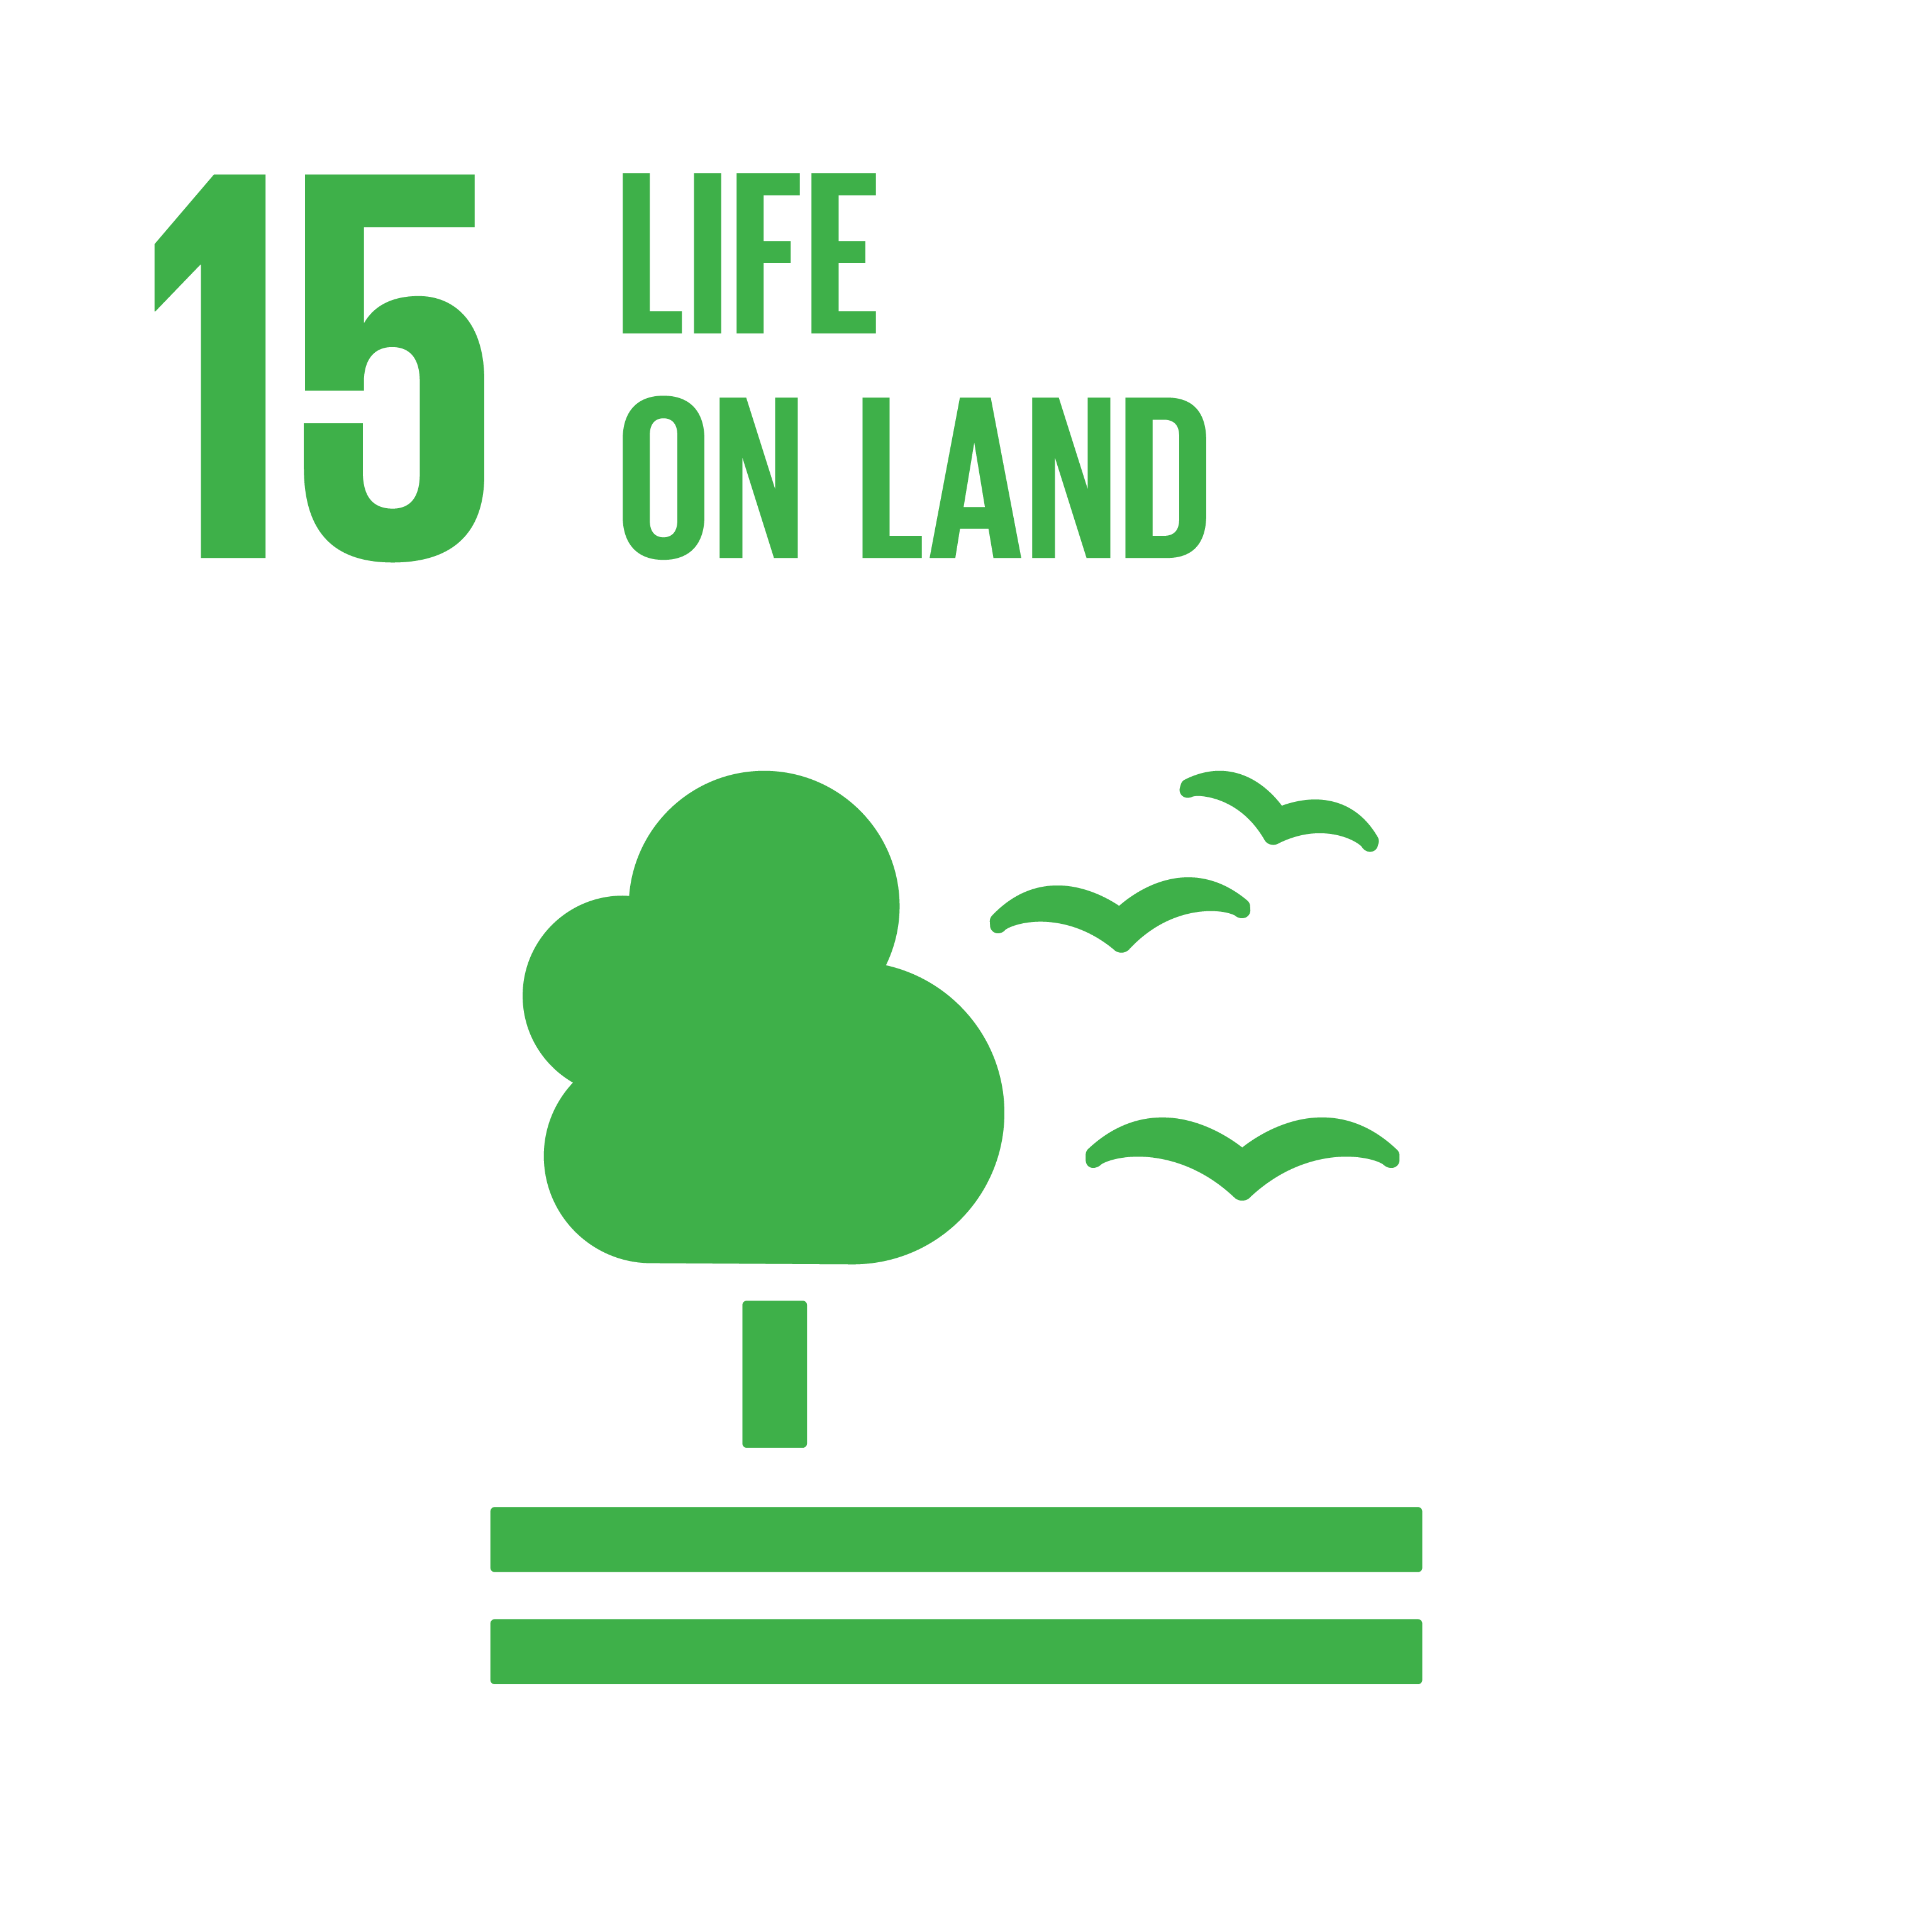 Protect, restore and promote sustainable use of terrestrial ecosystems, sustainably manage forests, combat desertification, and halt and reverse land degradation and halt biodiversity loss